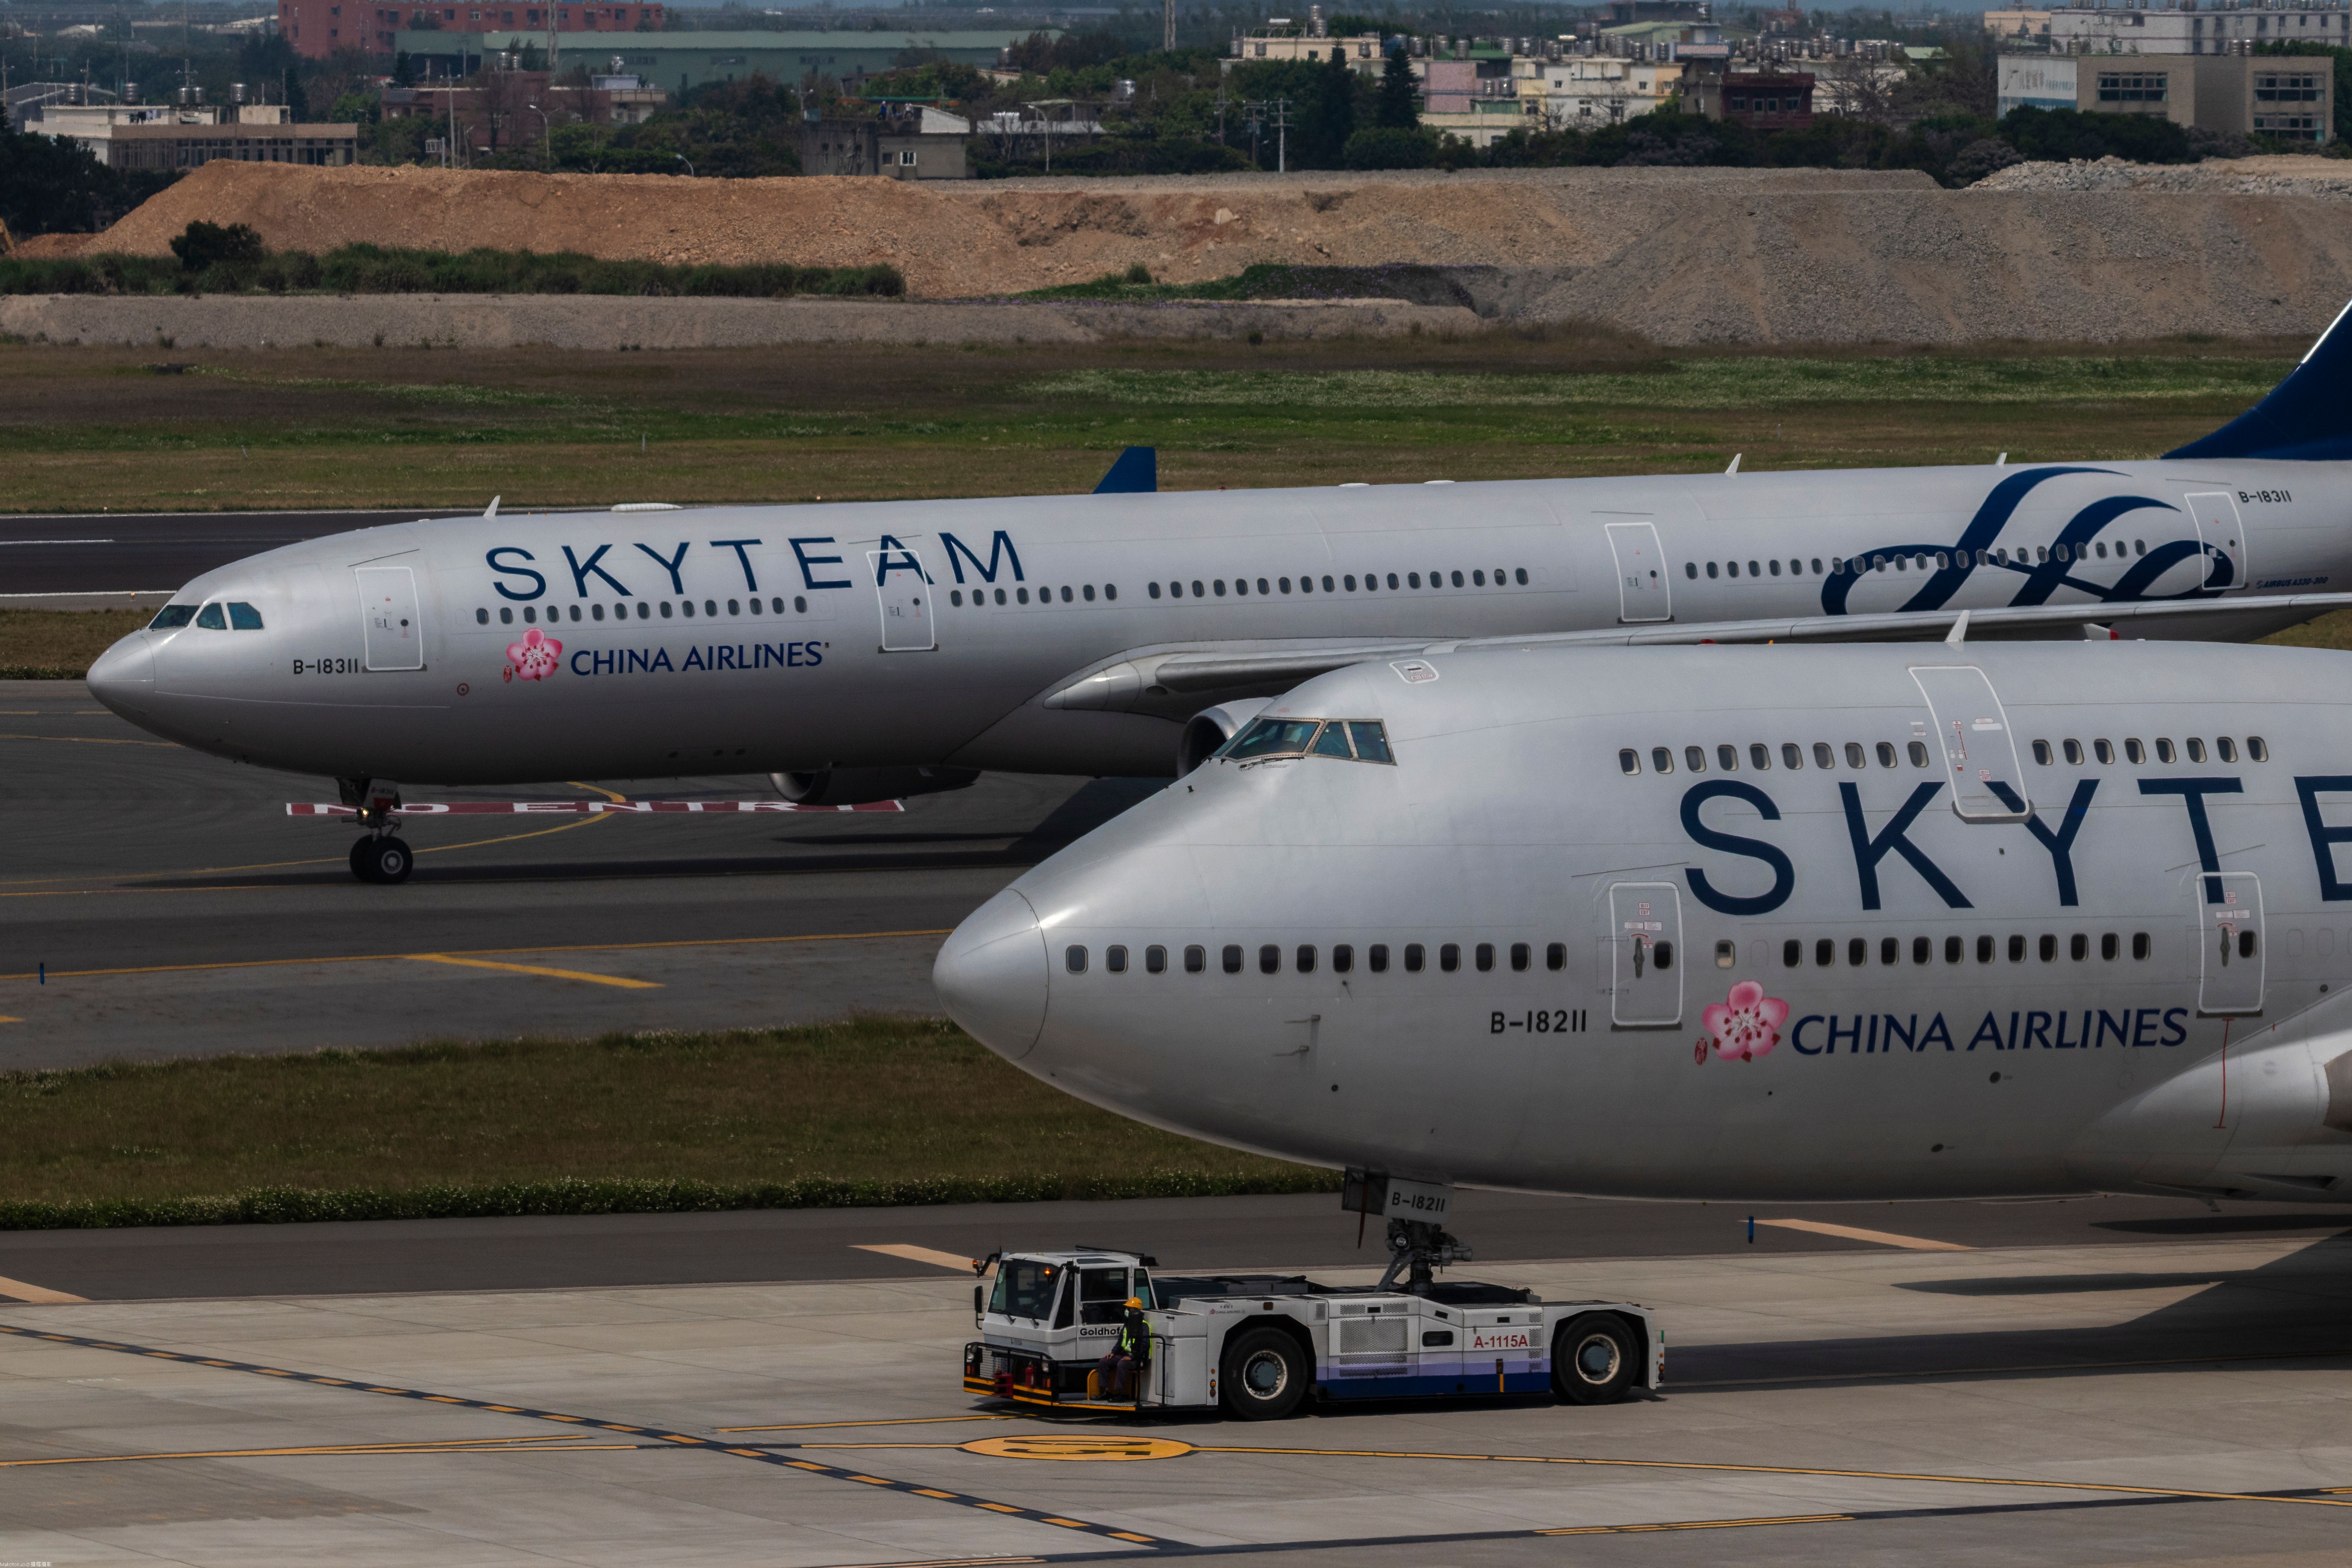 Two China Airlines aircraft in Skyteam livery on an airport apron.